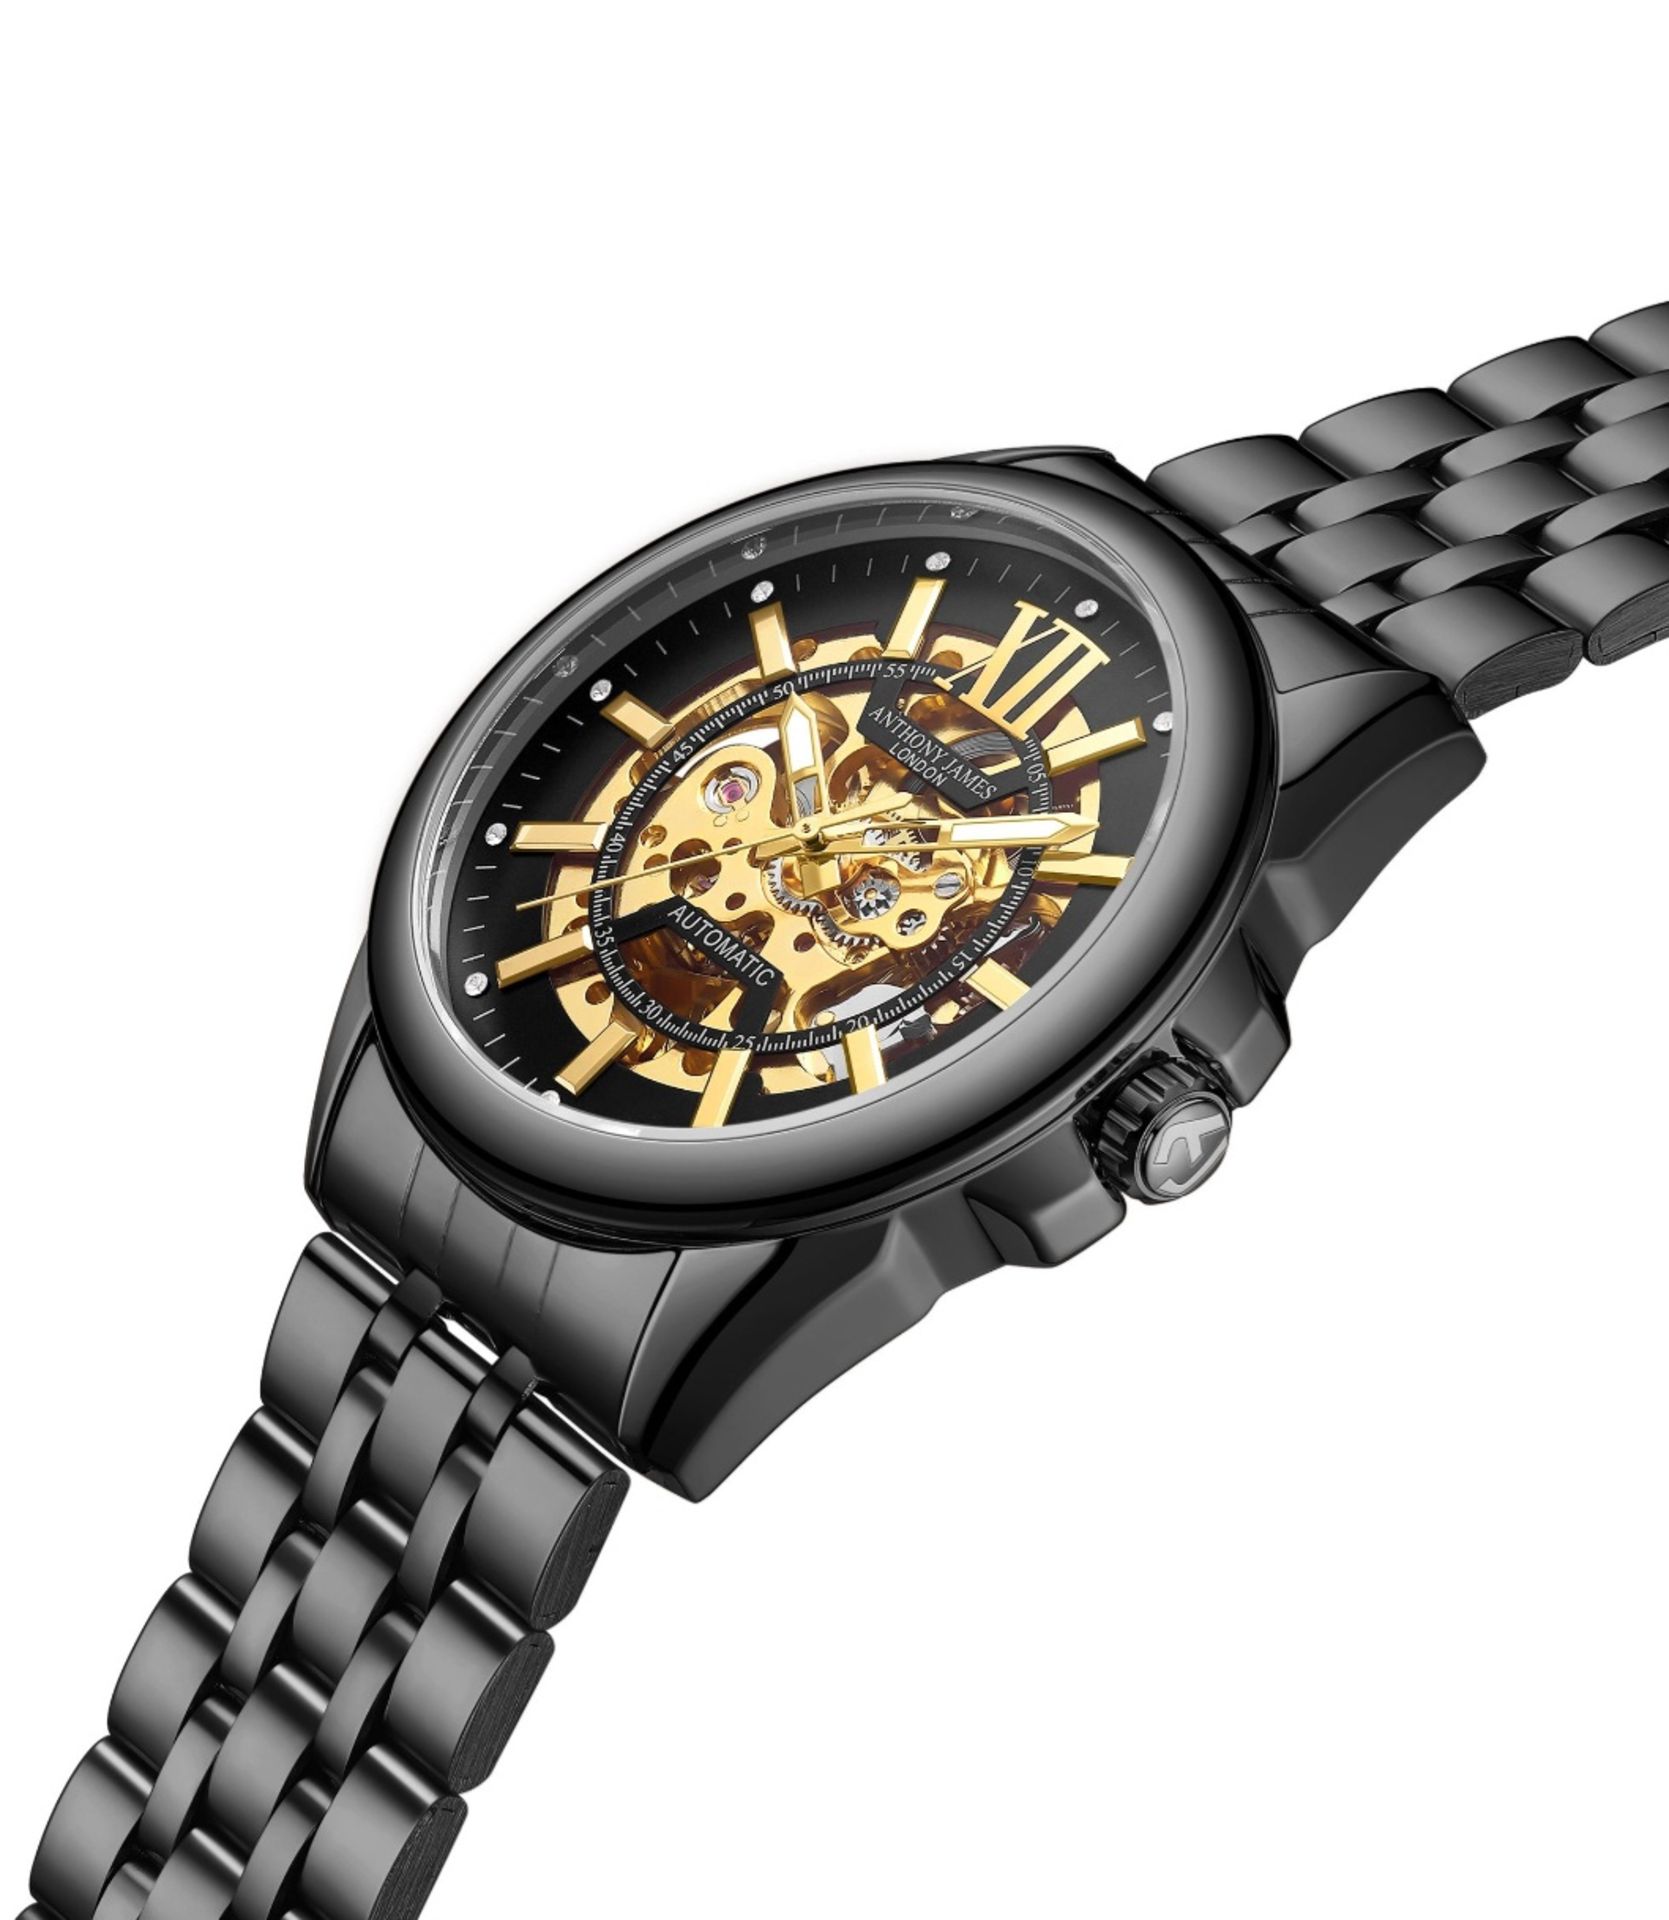 Anthony James Men's Watch - Image 2 of 3